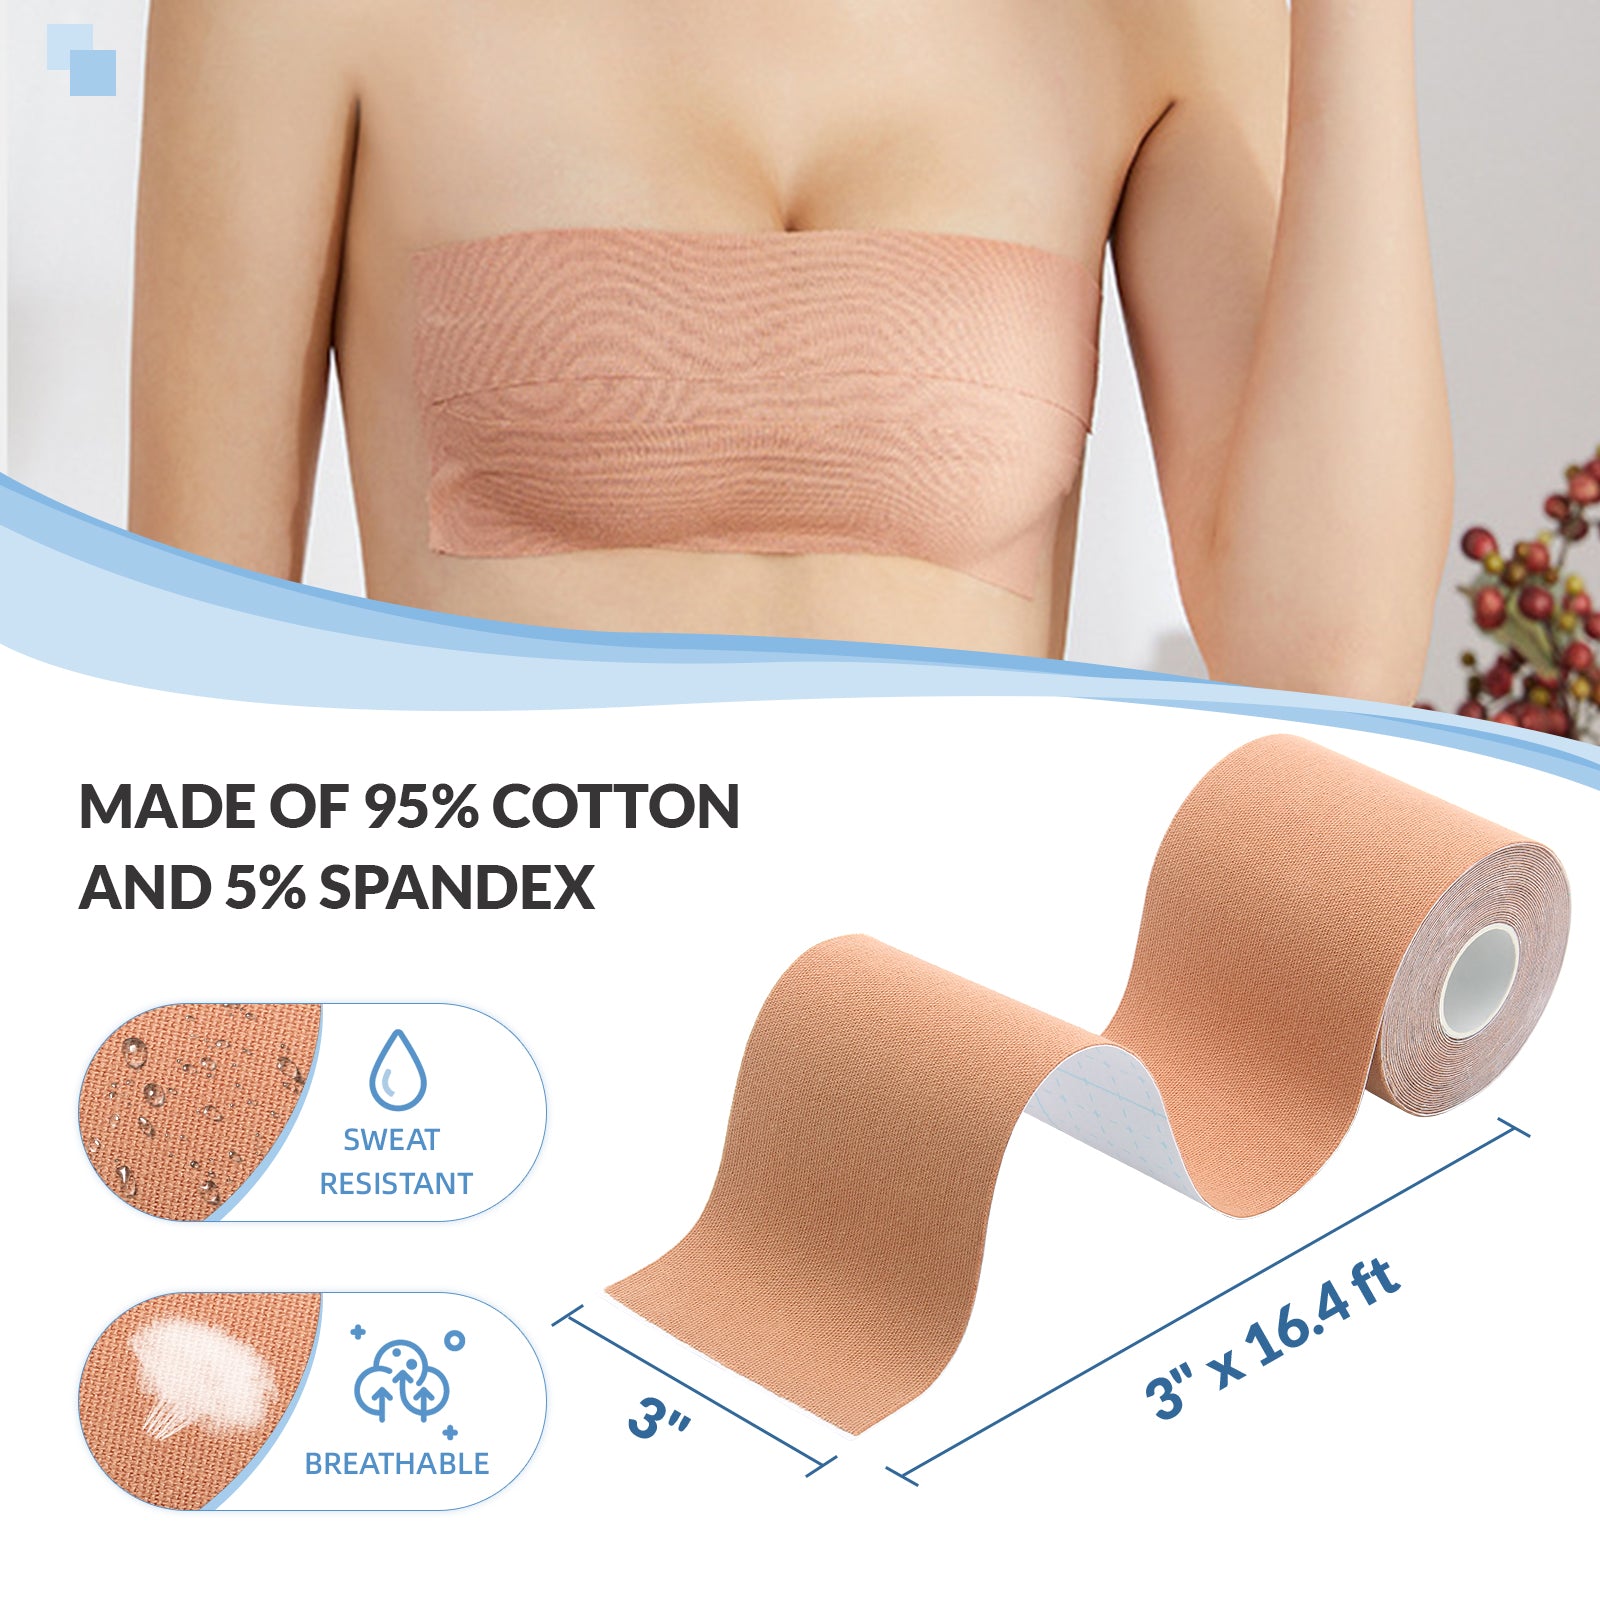  VBT Boob Tape, Replace Bra-Instant Breast Tape, Suitable for  A-G, Bob Tape for Breast Lift w 1 Boobtape, 5 Pairs Satin Breast Petals, 1  Pair Silicone Nipple Stickers, 36 PCS Double